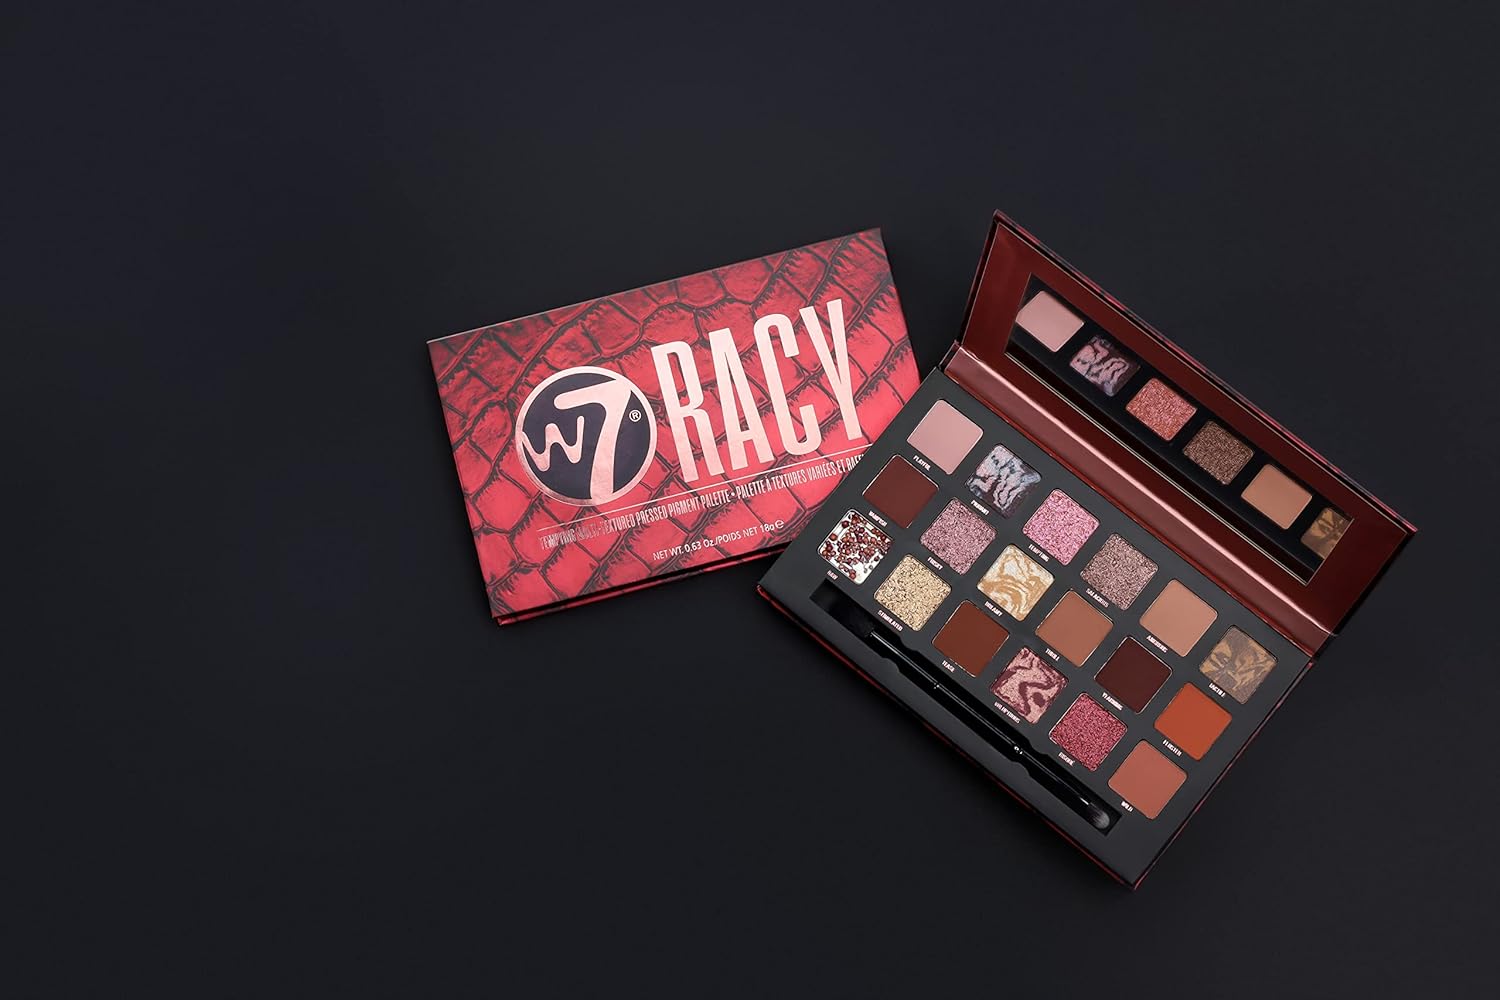 W7 Racy Pressed Pigment Palette - 18 Red Nude Colors - Flawless Long-Lasting Glam Makeup : Beauty & Personal Care